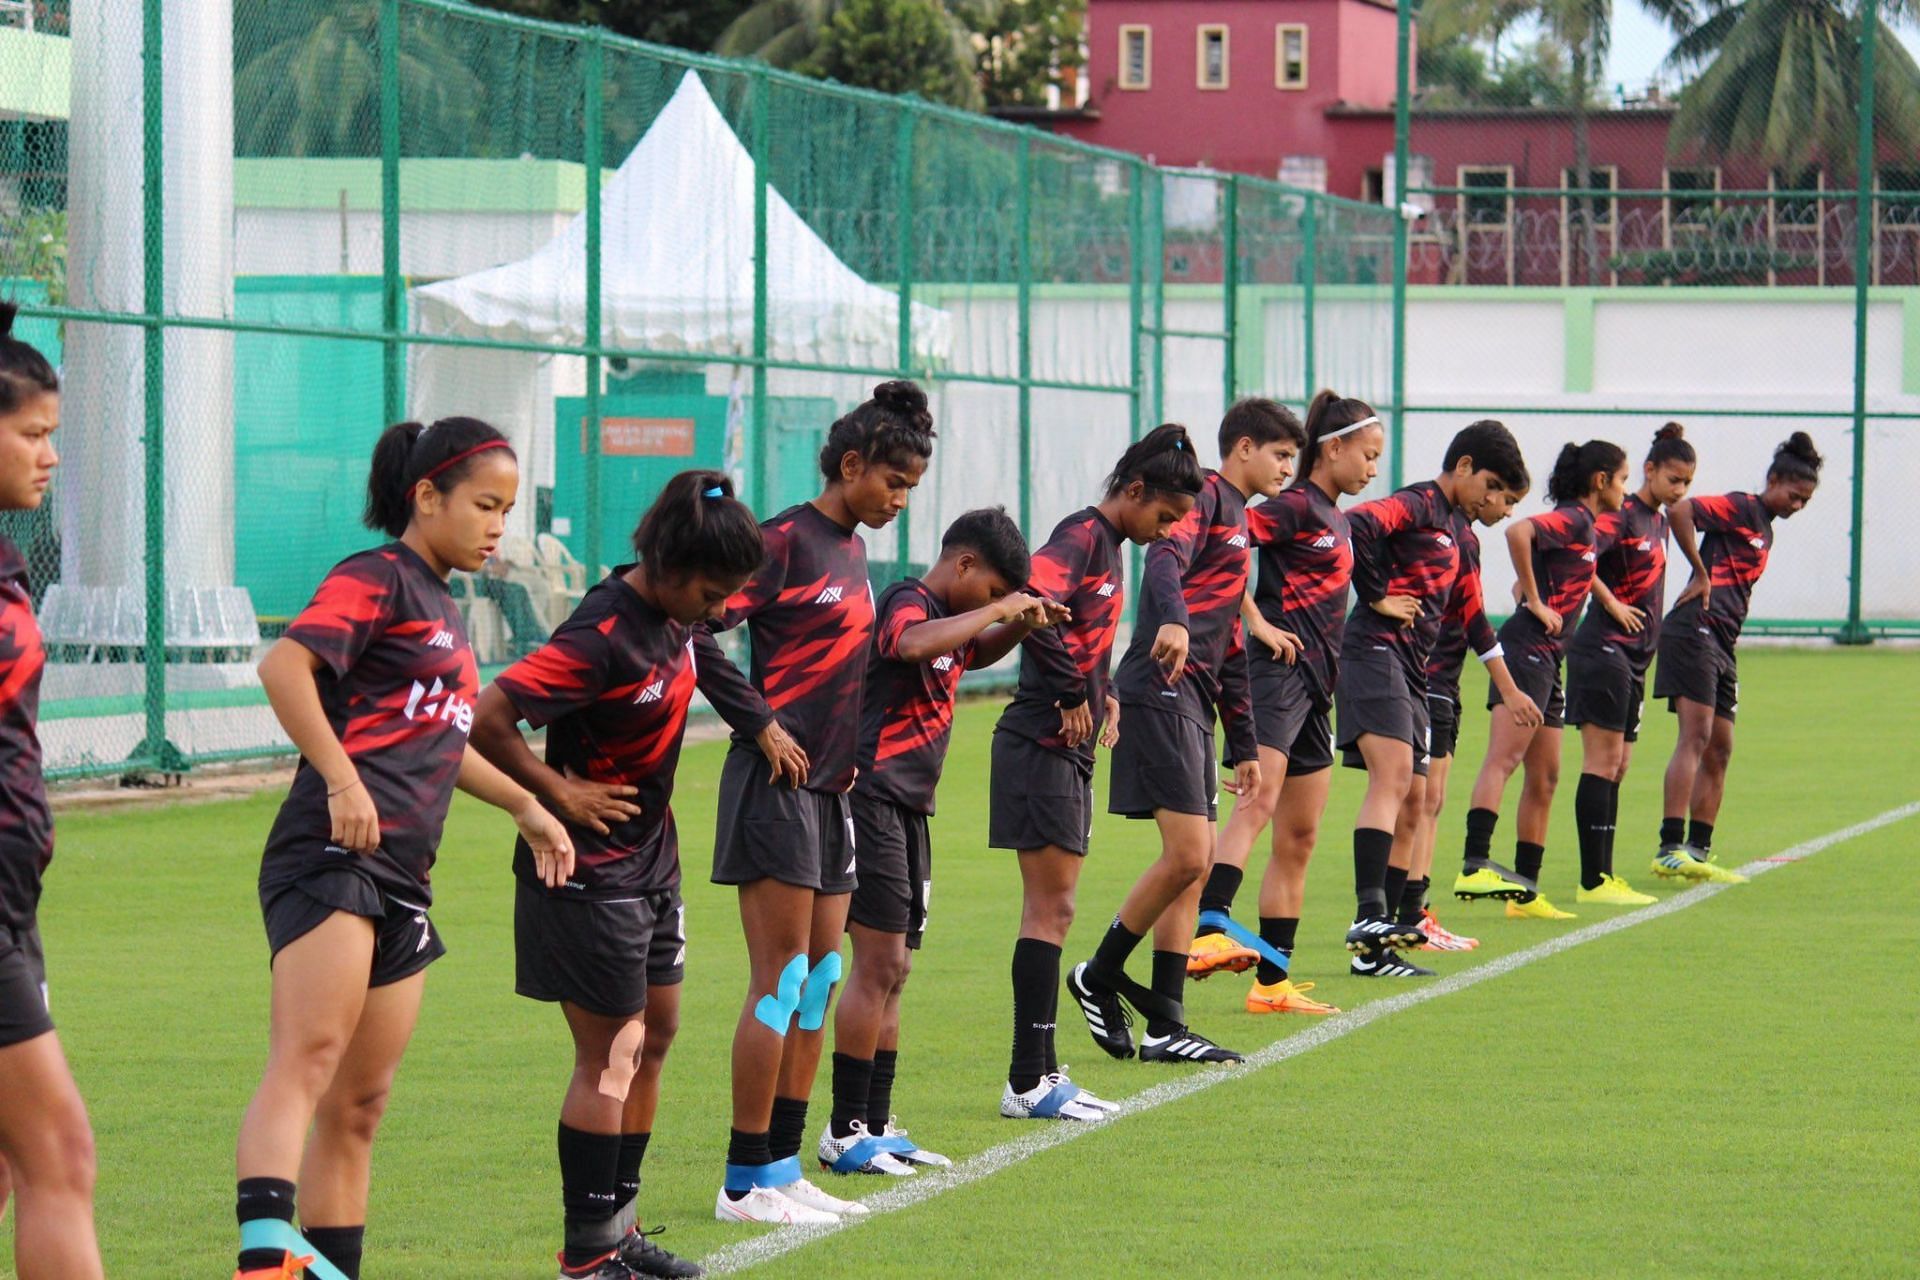 India suffered a humbling loss against USA in the FIFA U-17 Women